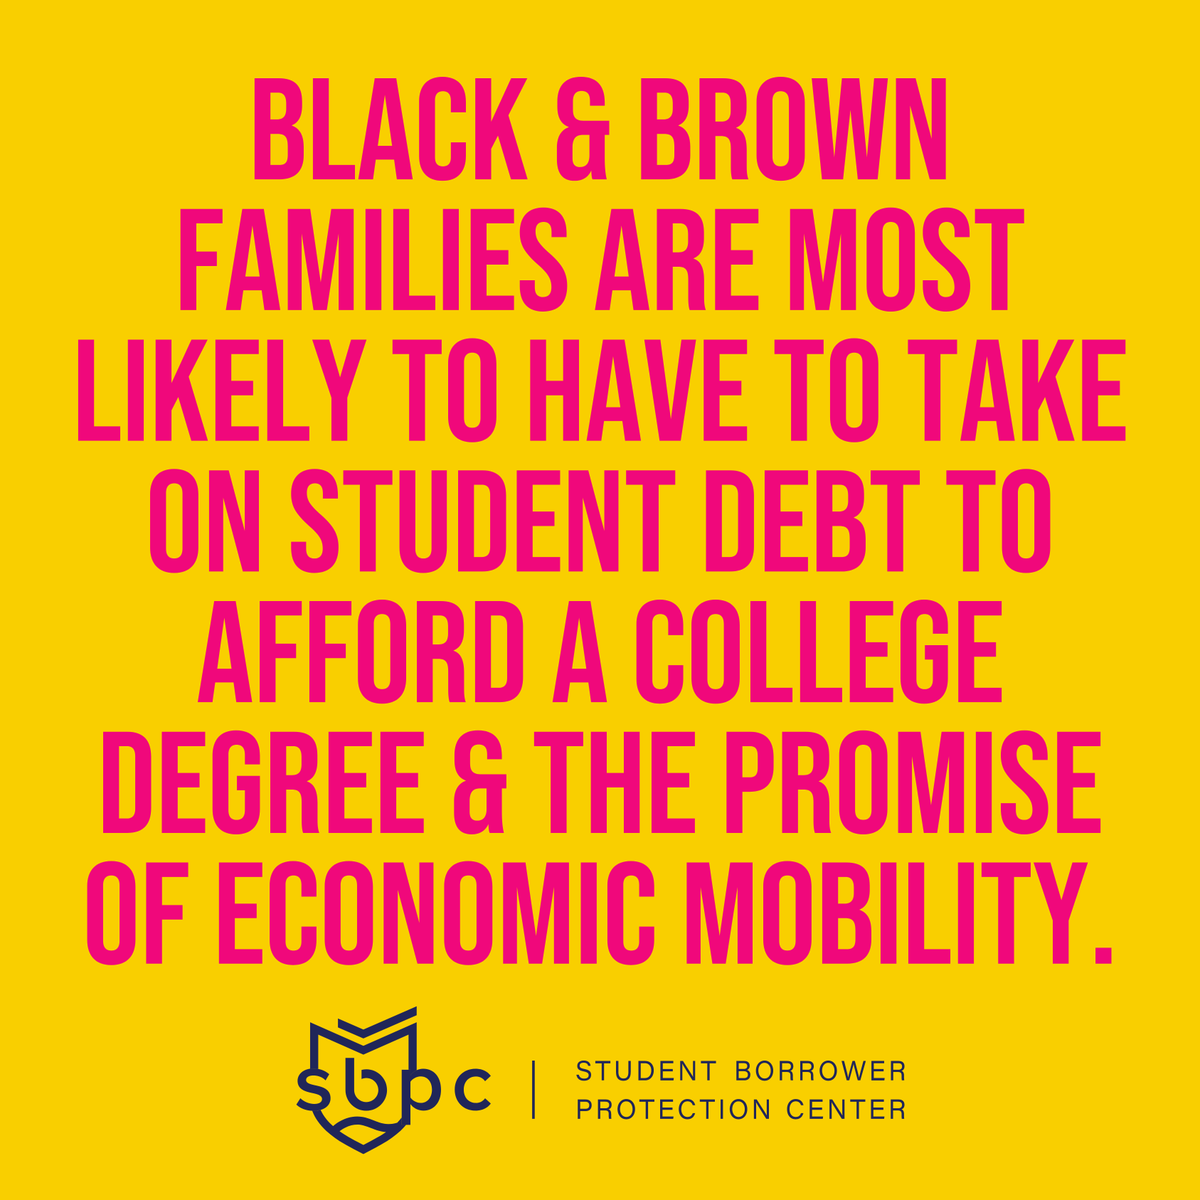 Due to our history of systemic racism, from slavery and Jim Crow laws to redlining, lending discrimination, and labor market/wage discrimination—Black and brown families in this country have been robbed of opportunities to build generational wealth.